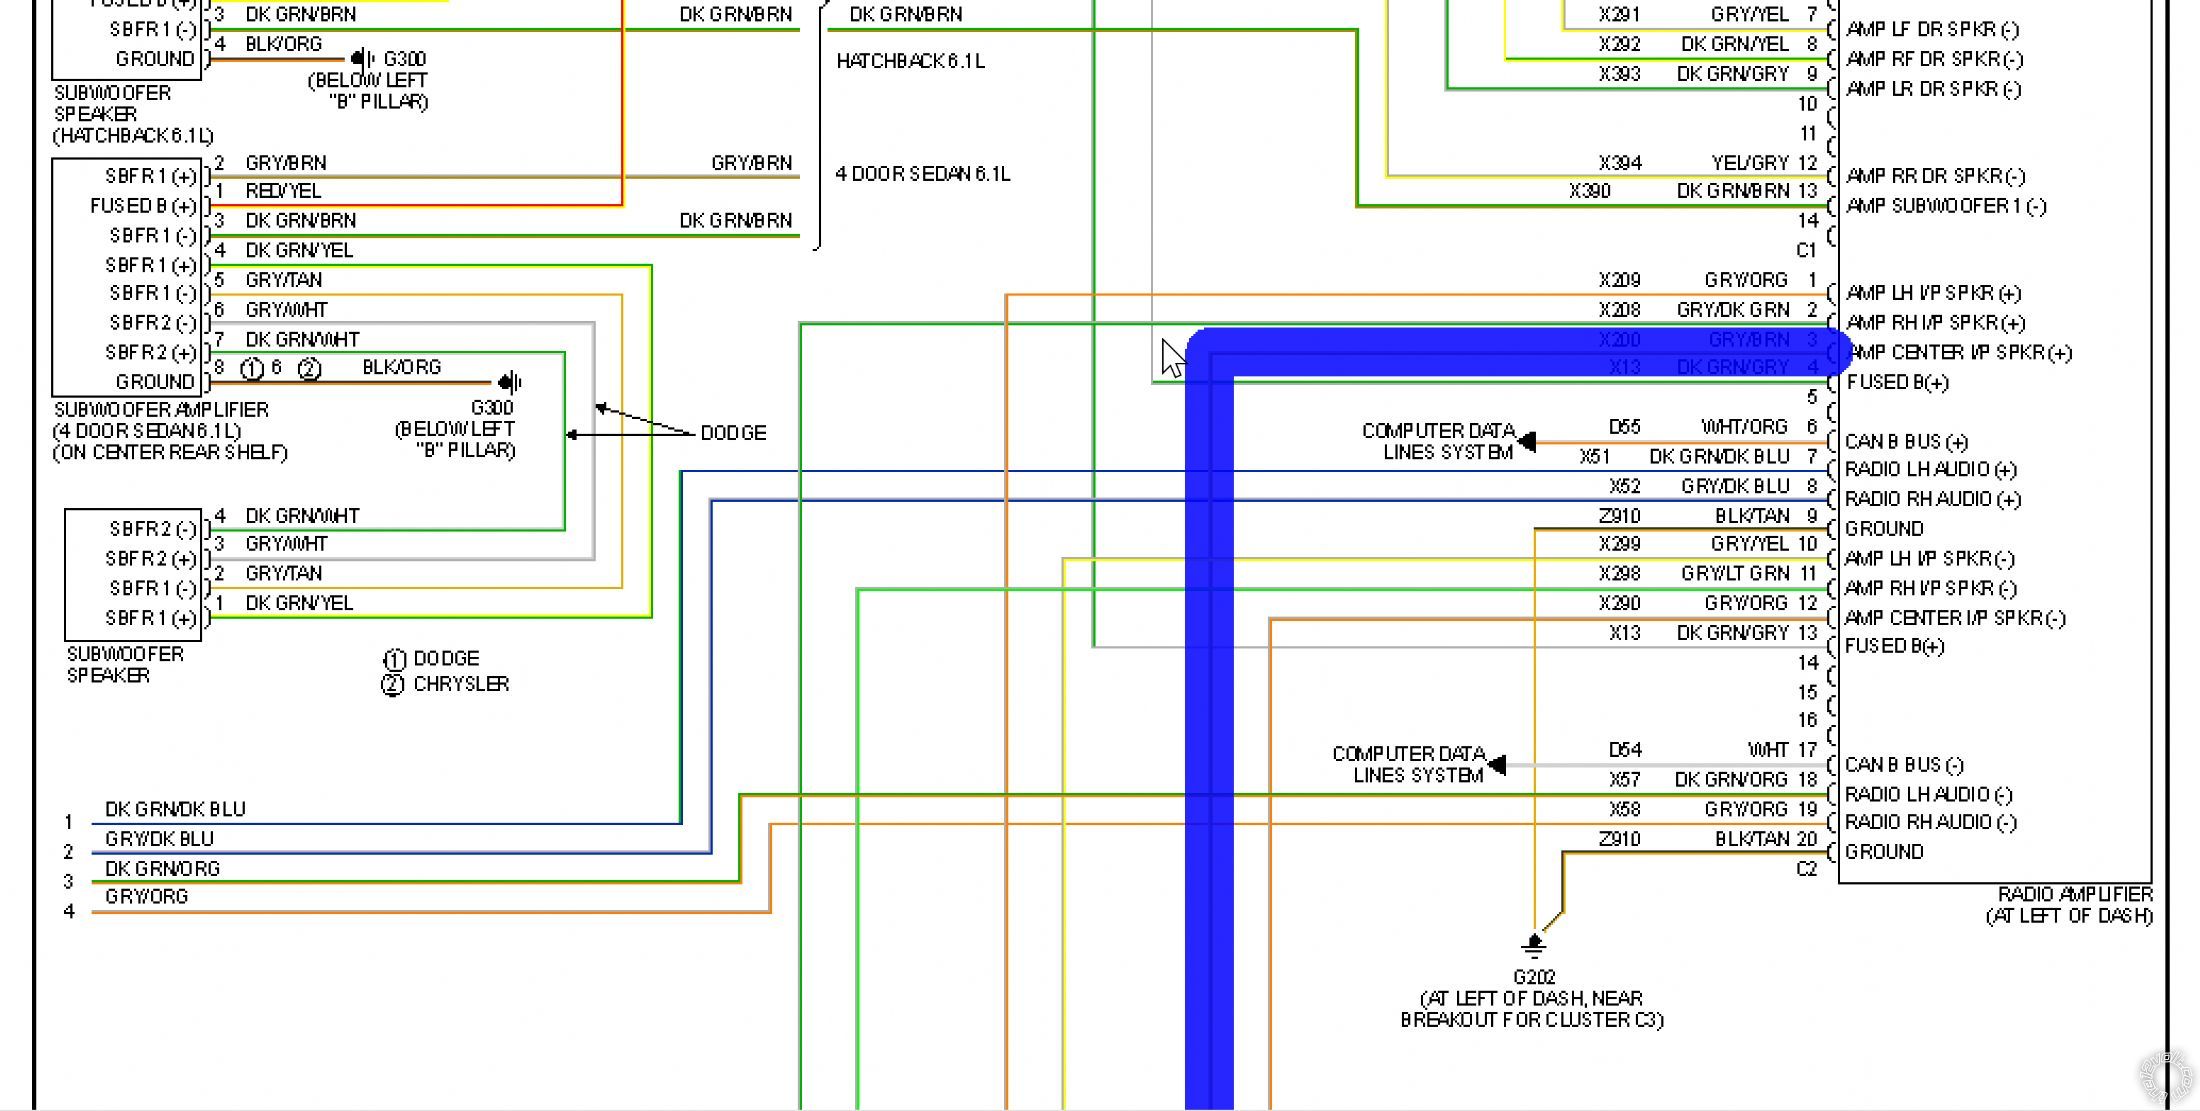 2012 Dodge Ram 1500 Stereo Wiring Diagram from www.the12volt.com